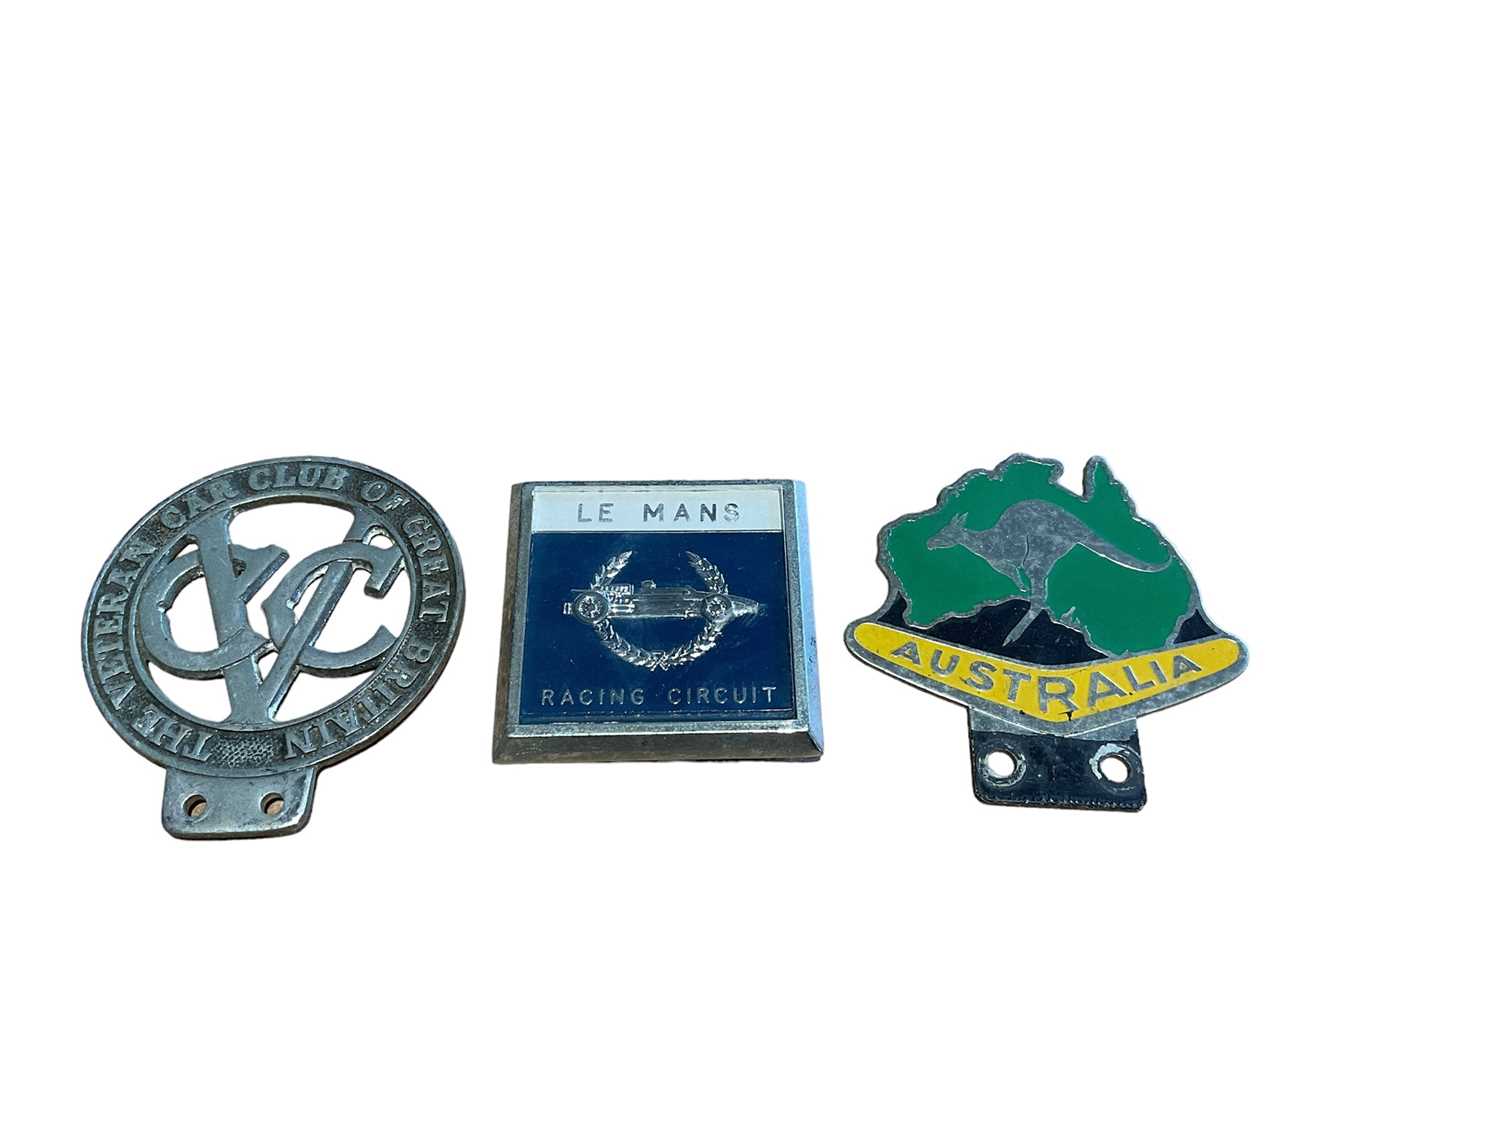 Lot 103 - Vintage Le Mans Racing Circuit car badge, together with a Veteran Car Club of Great Britain badge and an Australia car grill badge (3)